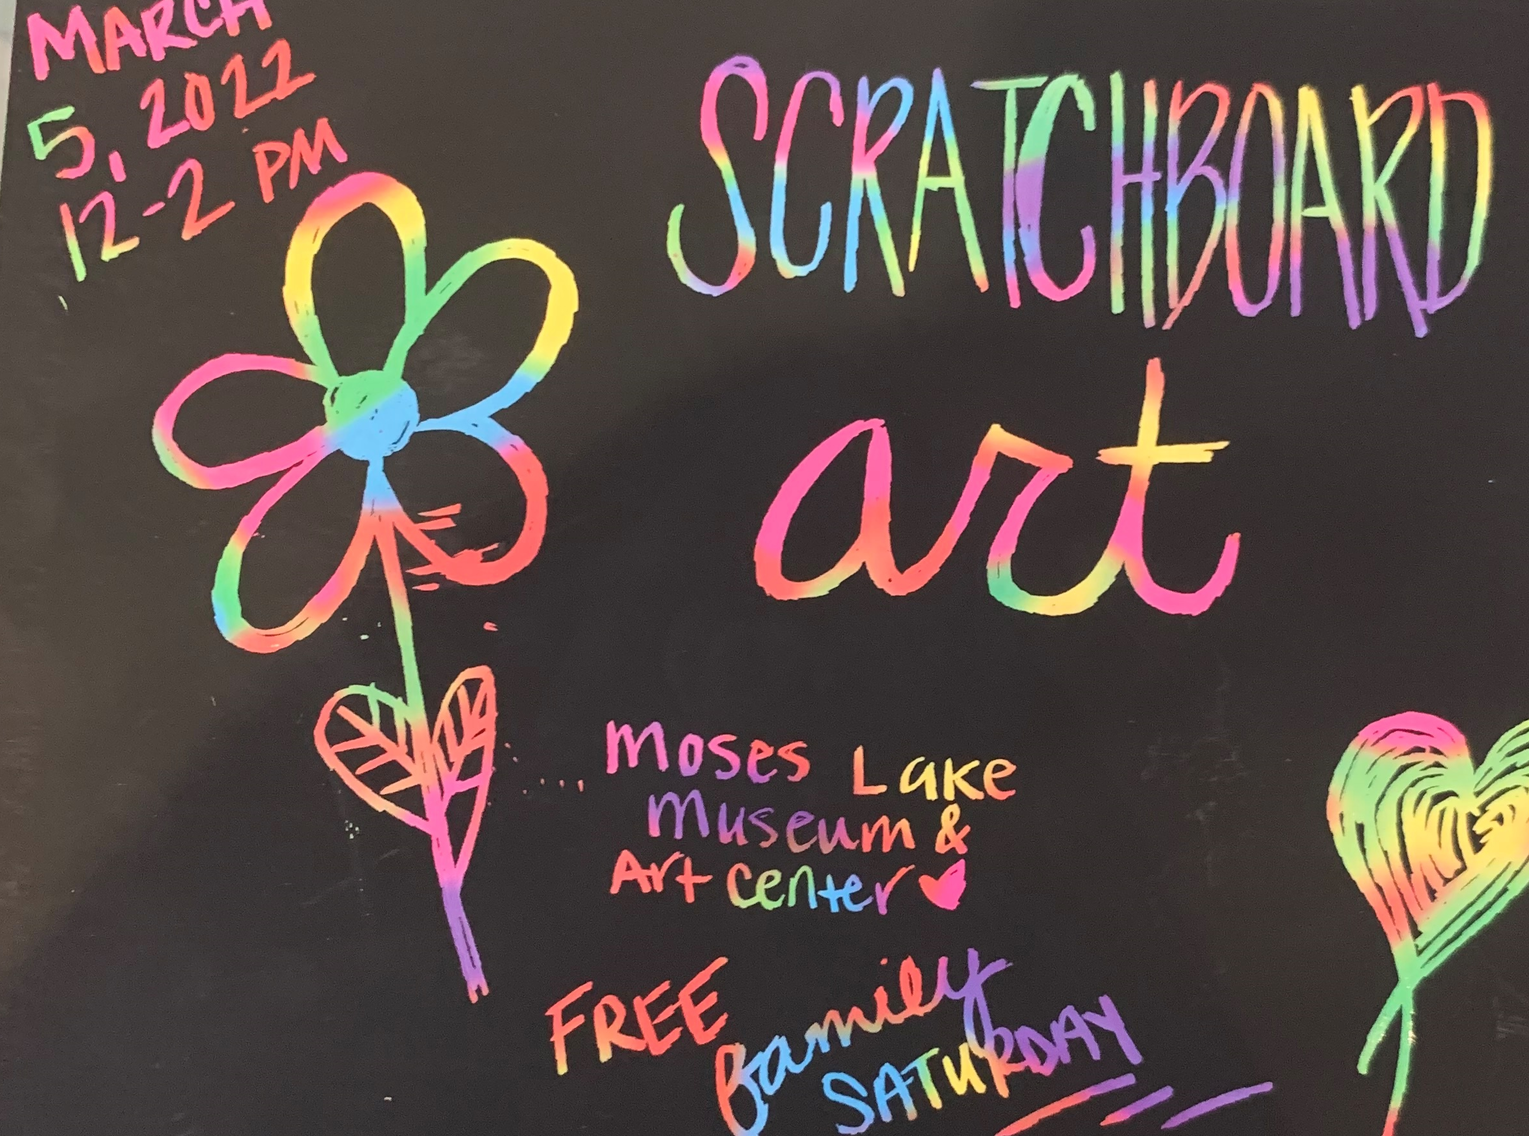 <h1 class="tribe-events-single-event-title">March Free Family Saturday: Scratchboard Art</h1>